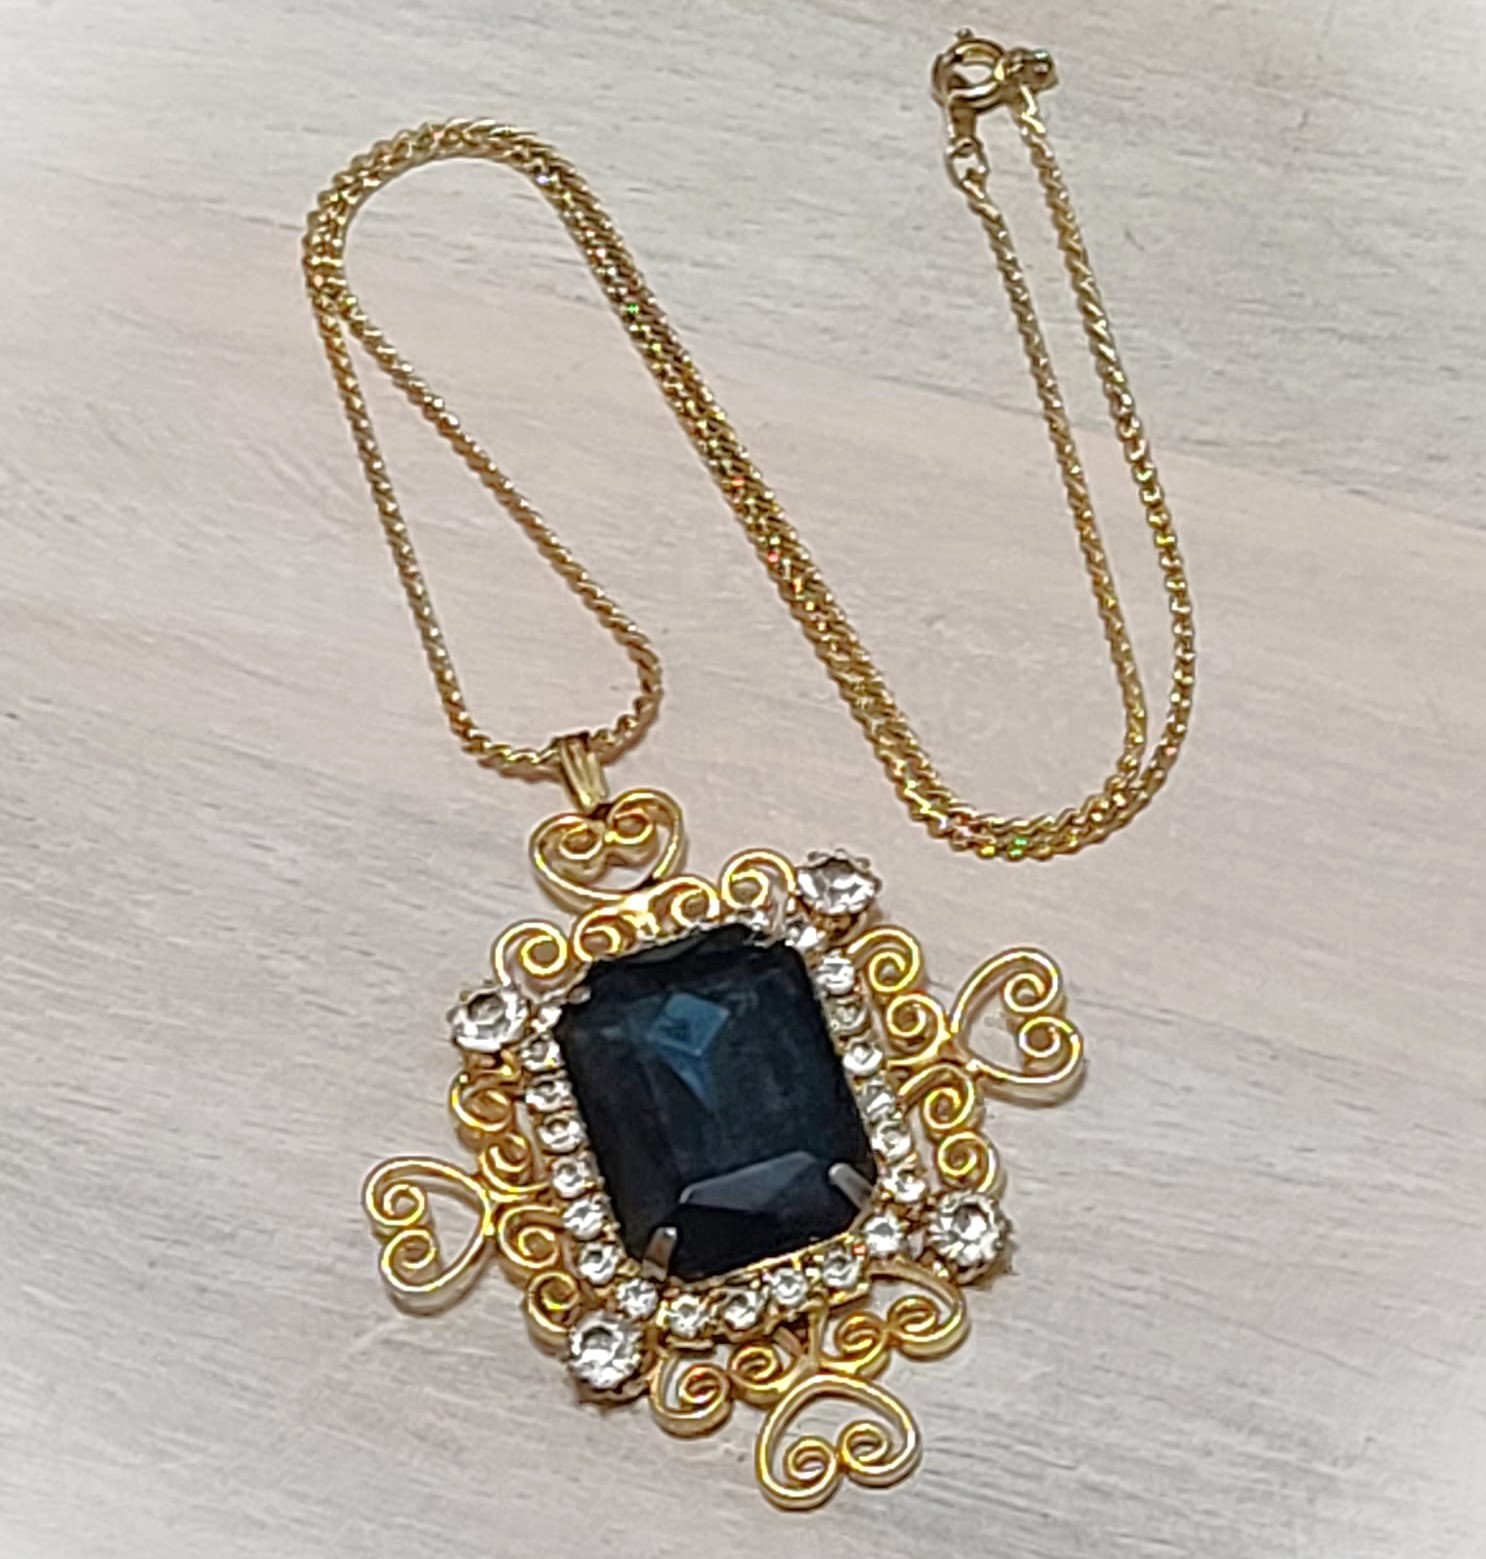 Vintage blue sapphire rhinestone pendant necklace with chain